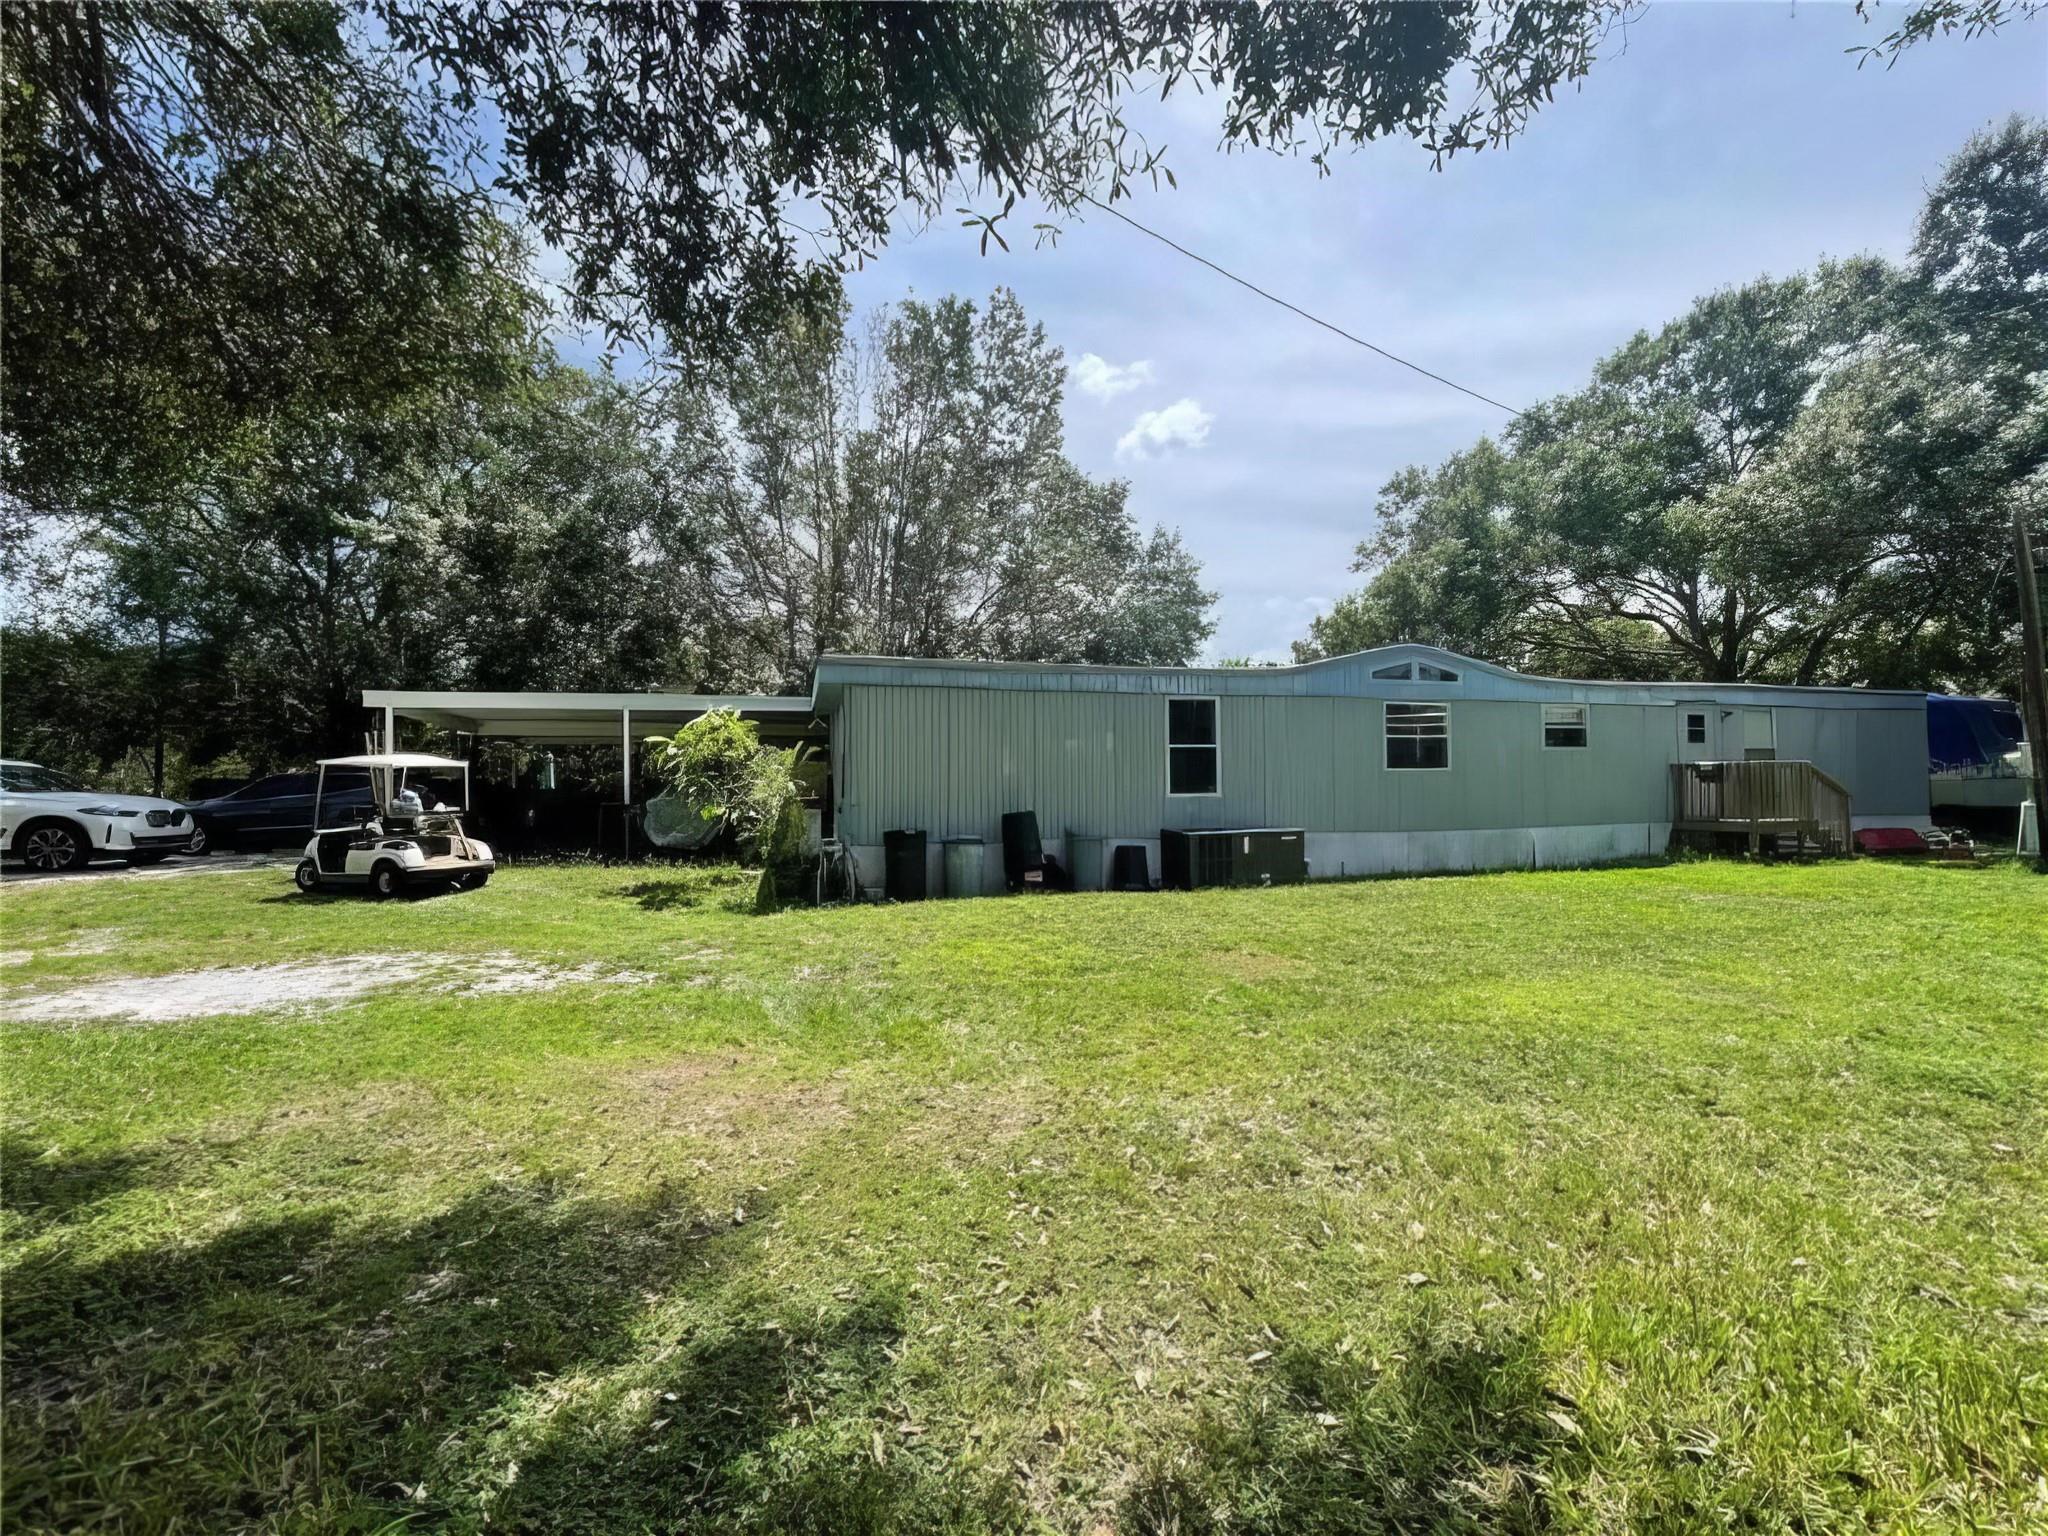 Serene Living- 2/2 mobile home situated on 4.9 +/- acres in close proximity to amenities.  Property is fenced and animals are welcome.   Mobile home has new flooring and new central AC. 1152 sq ft & 1976 TLA. Seller is offering OWNER FINANCING Call for more details!